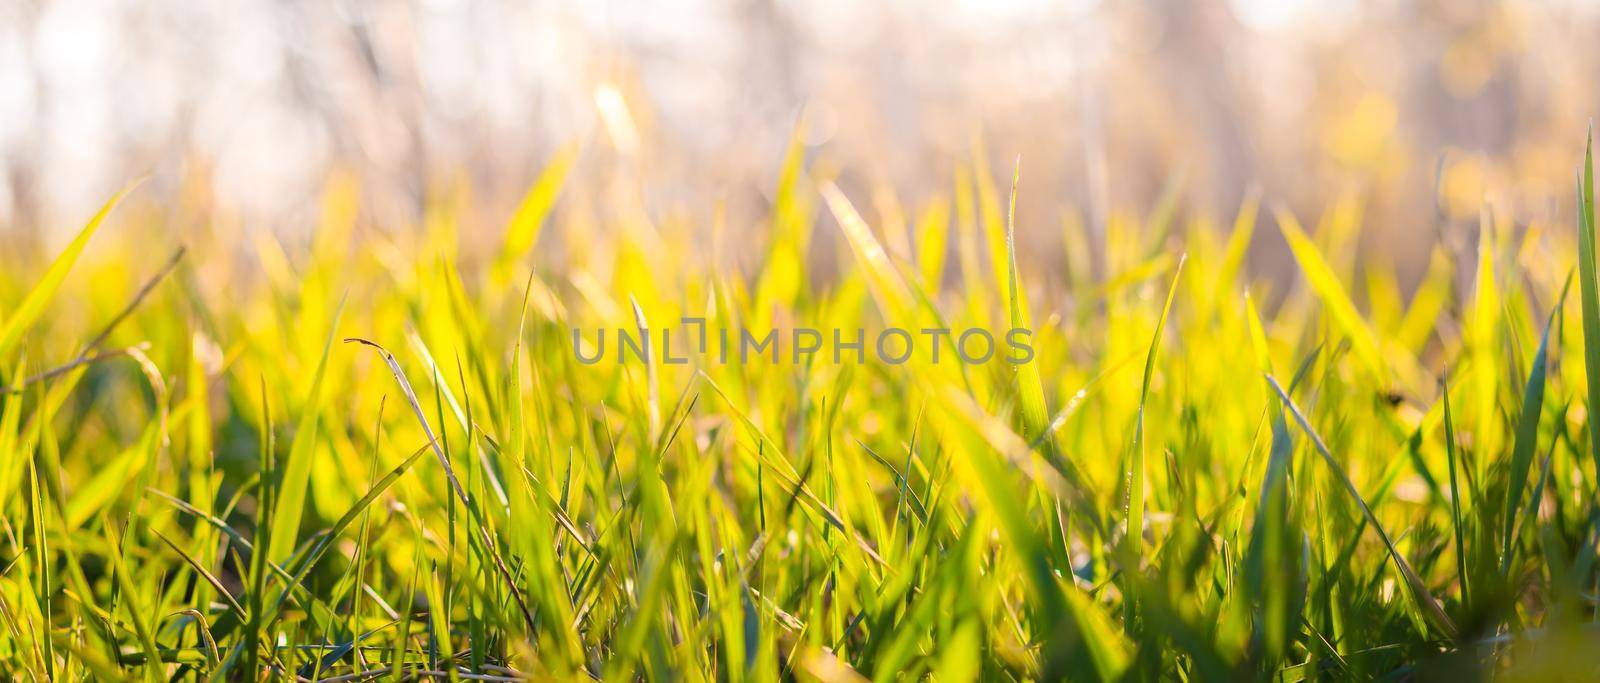 Background of young green grass in the evening light. Grass background with place for text. Spring background.